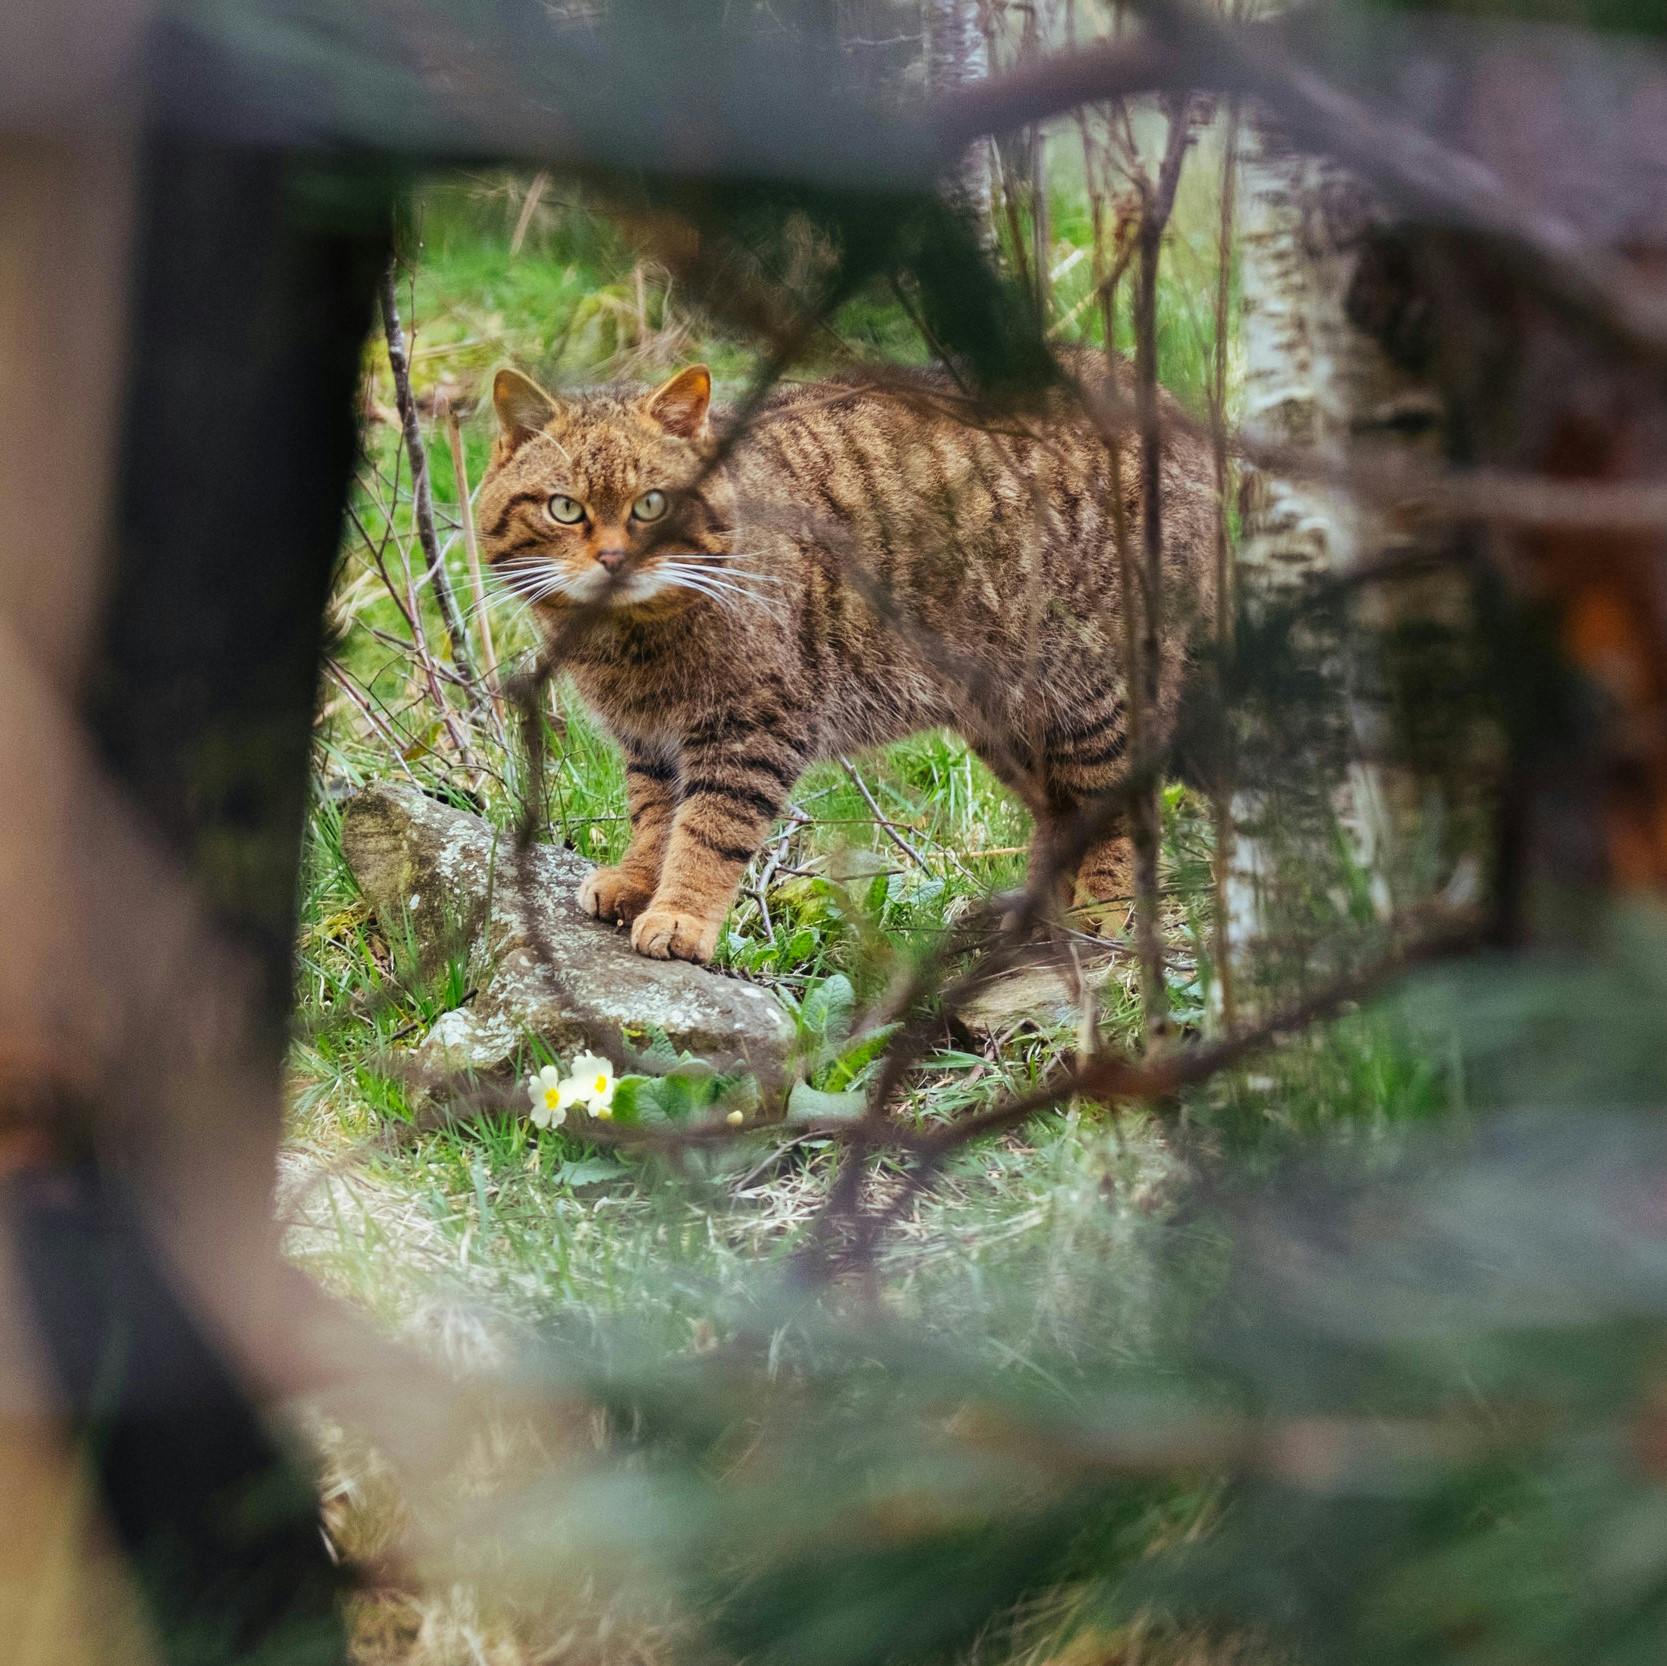 A rare image of the critically endangered Scottish wildcat.